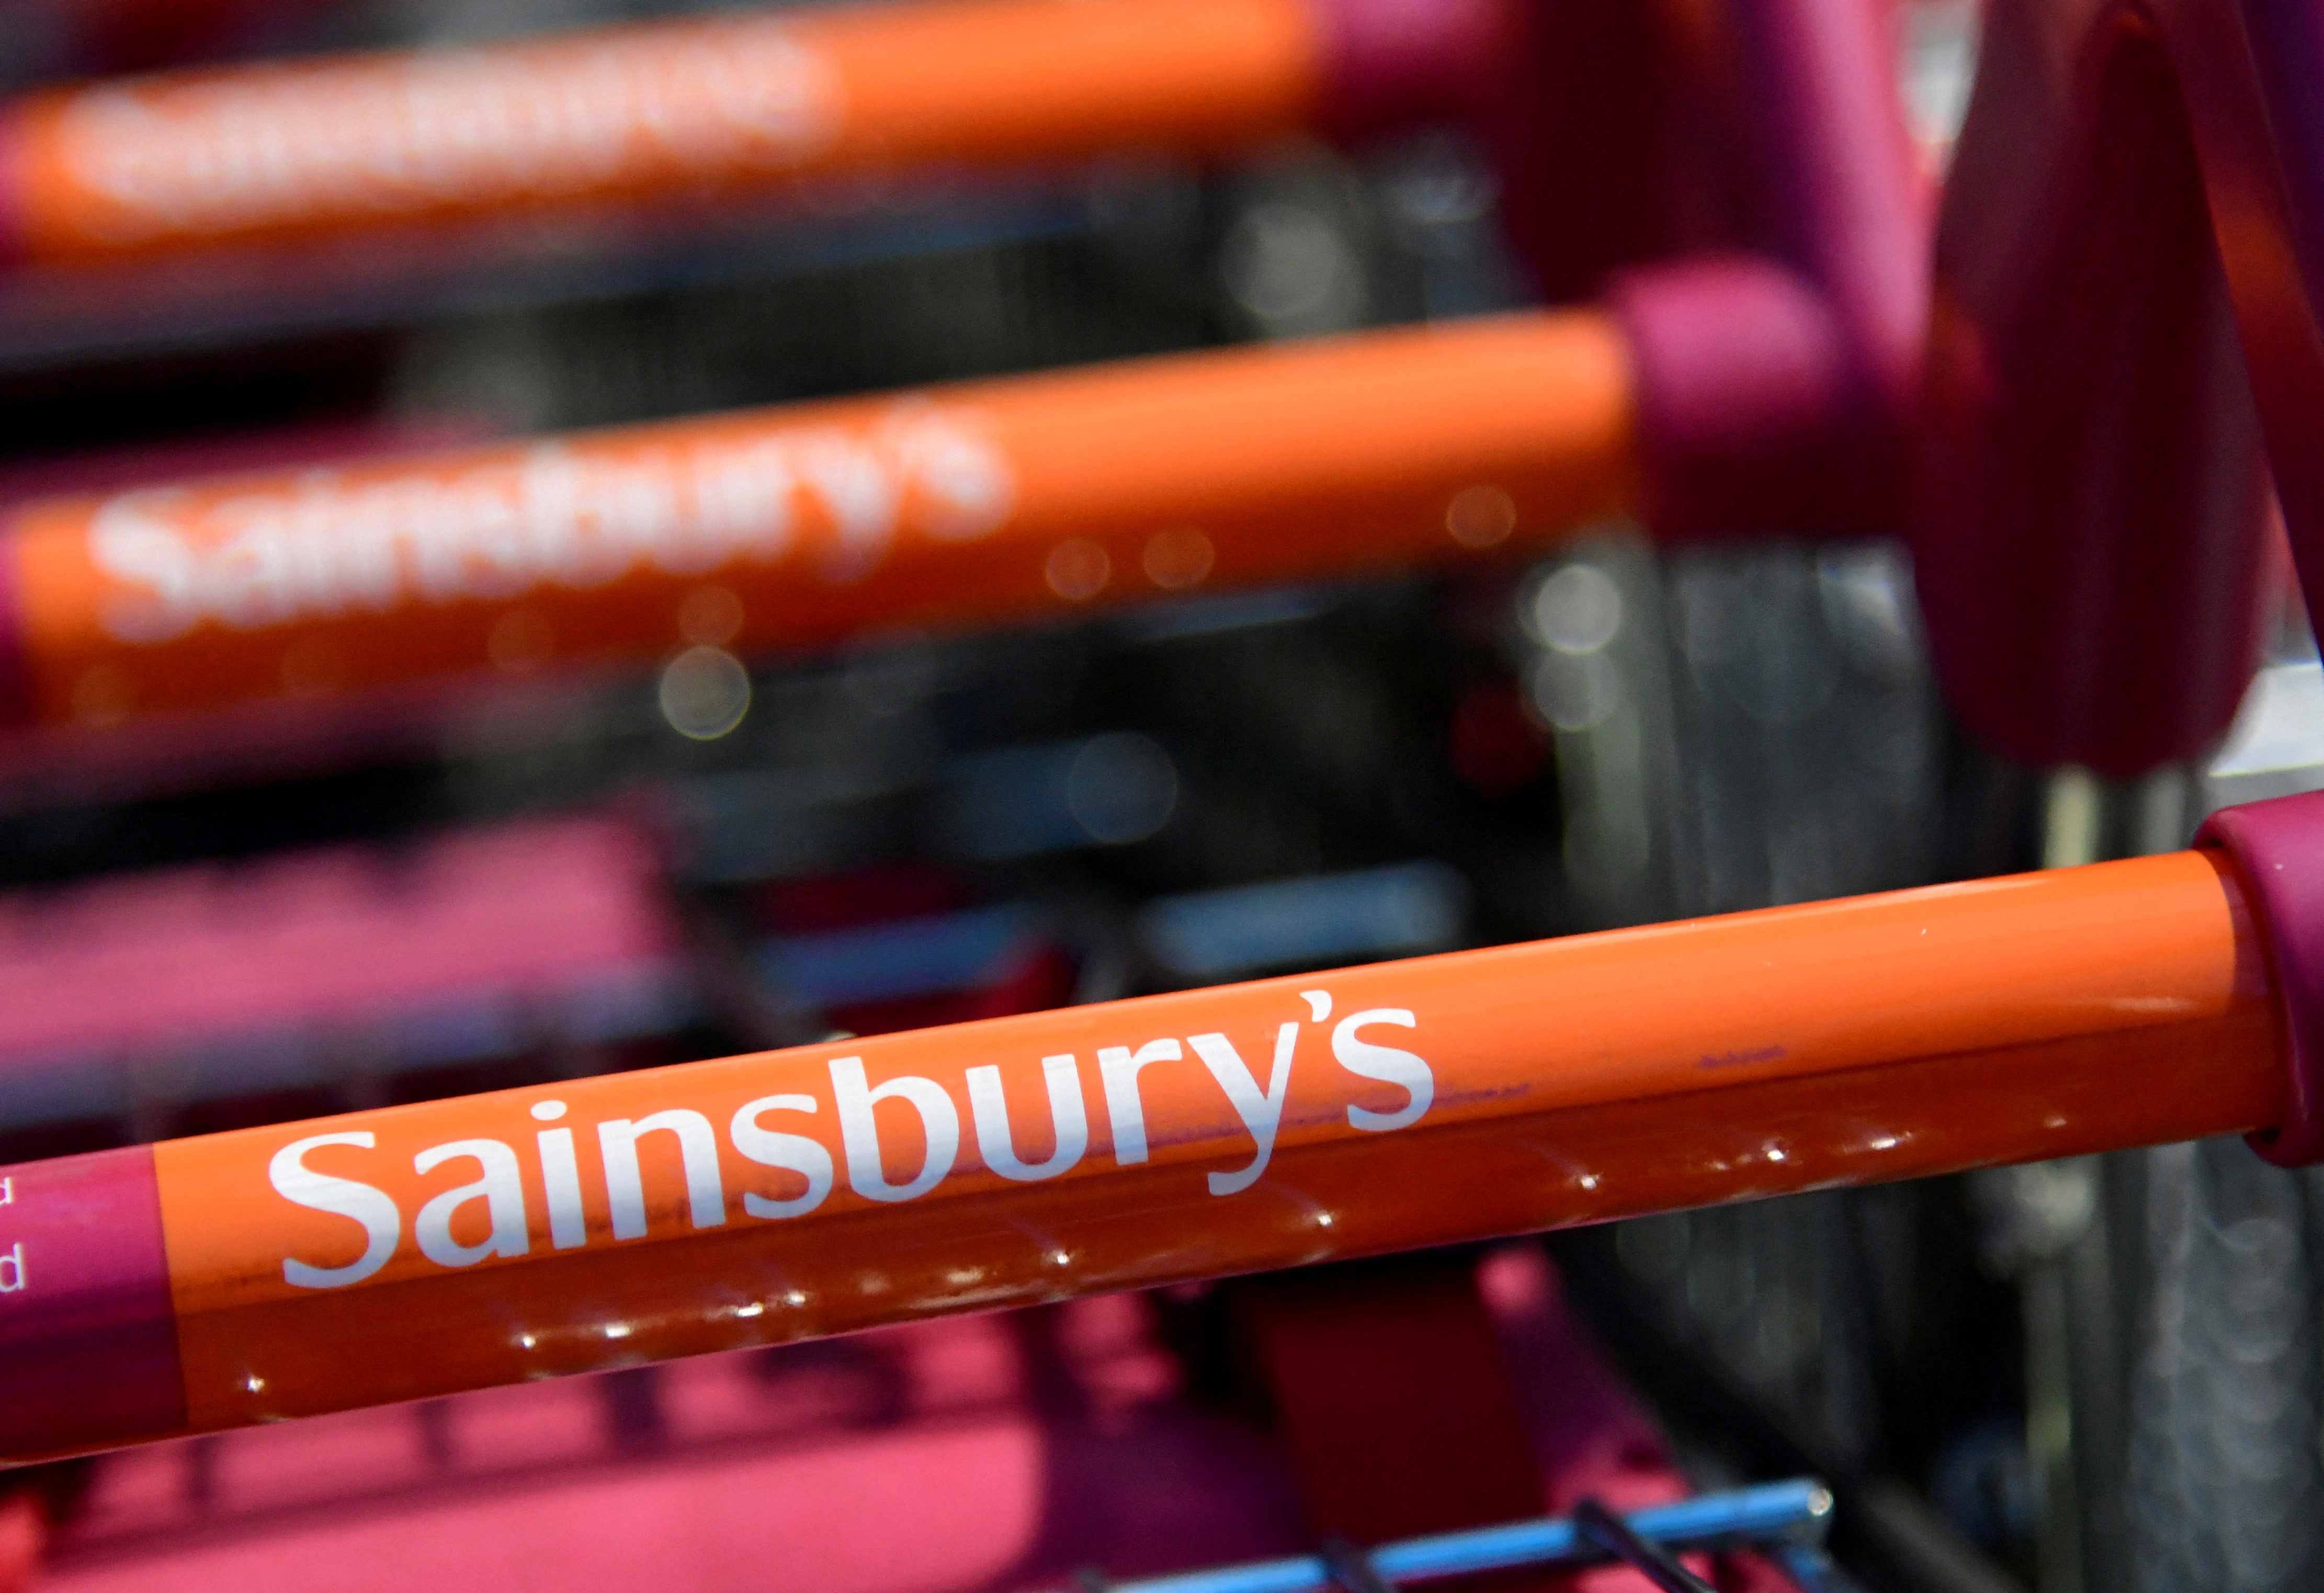 Branding is seen on a shopping trolley at a branch of the Sainsbury's supermarket in London